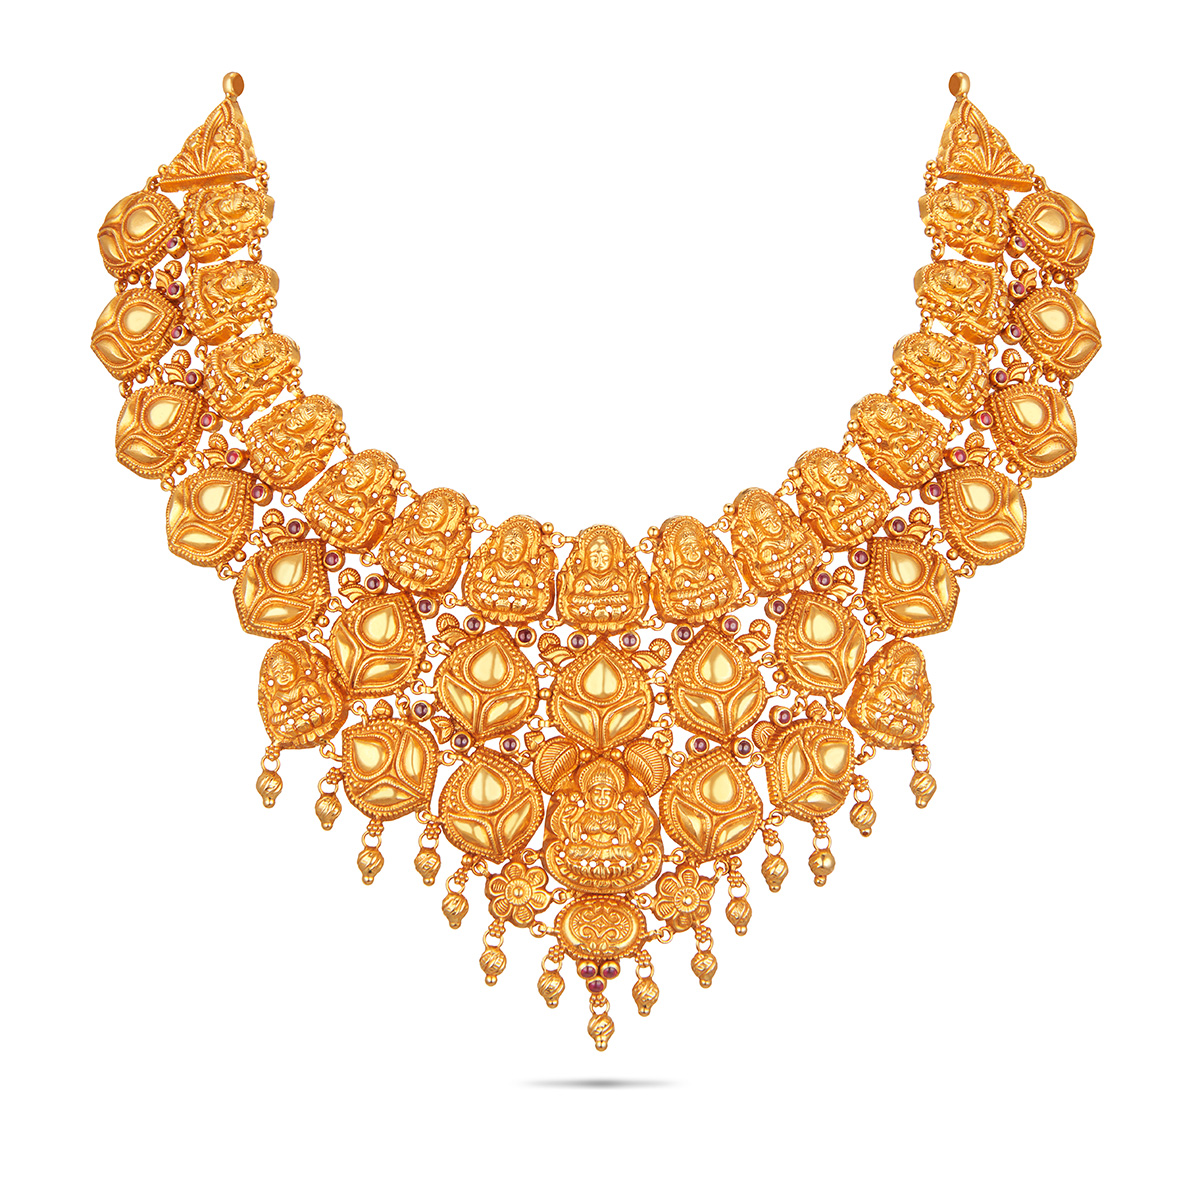 New arrival of Trendy Gold Necklace with best wholesale price made in india with best custom packing